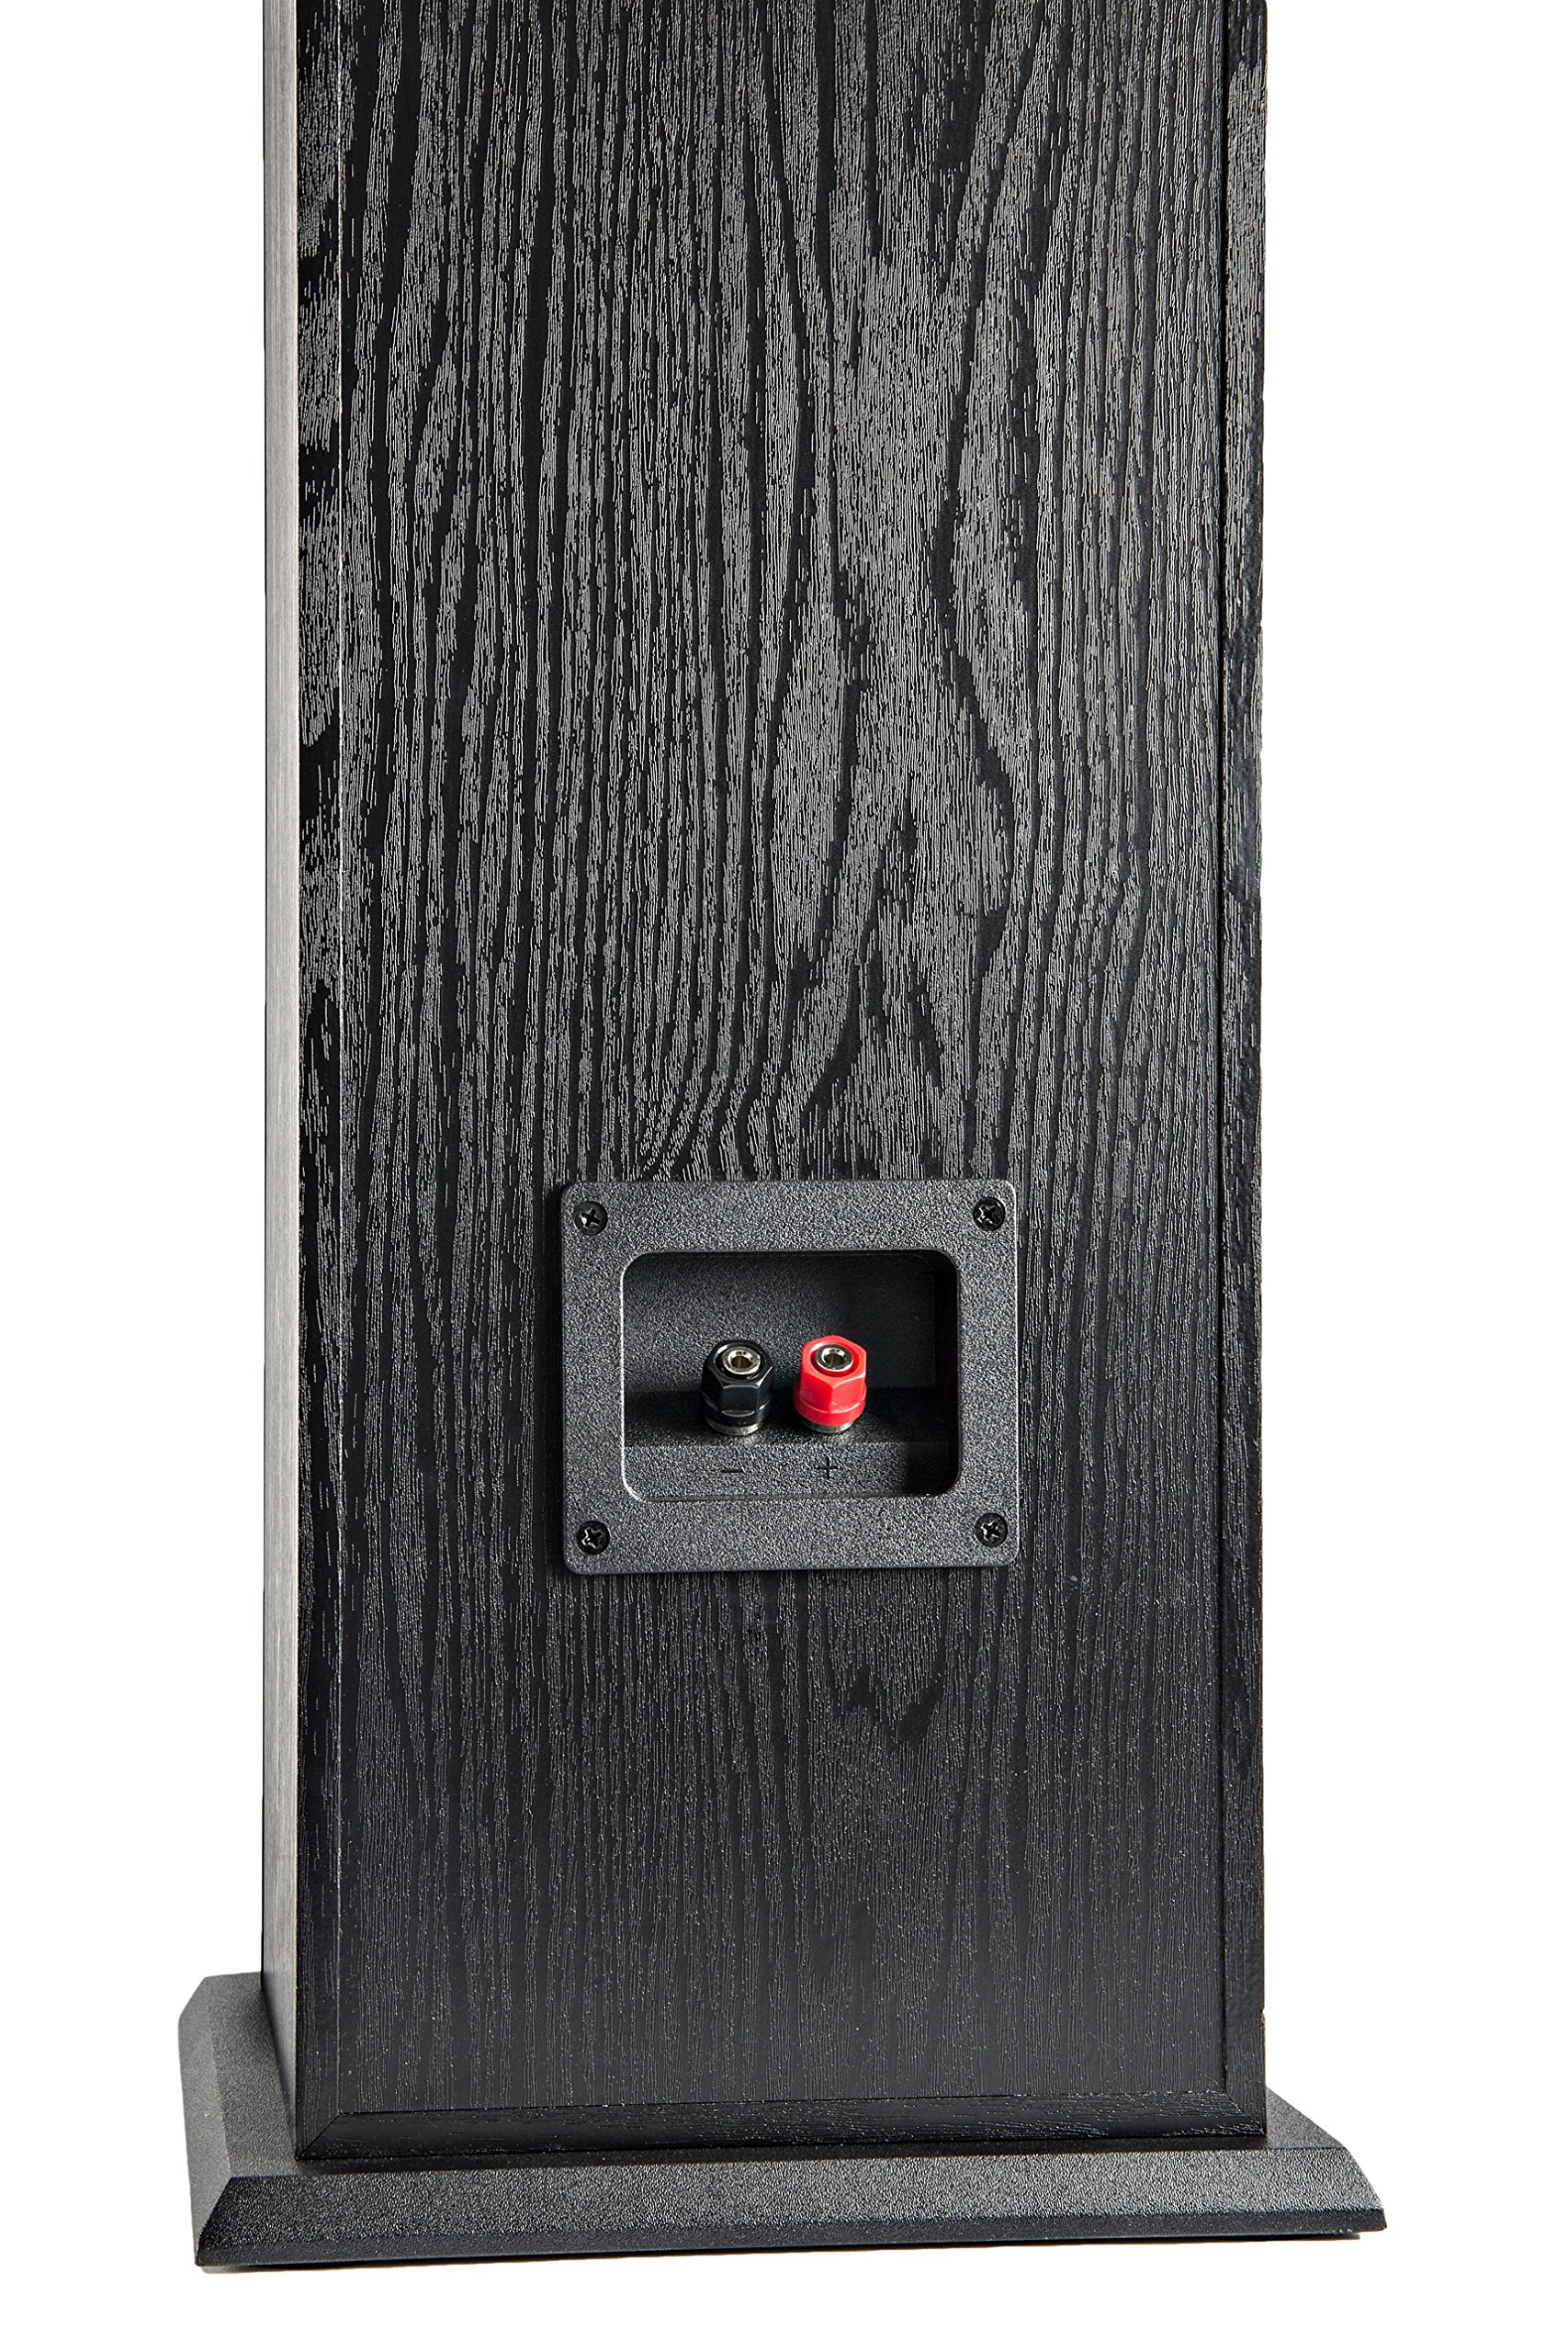 Polk Audio T50 150 Watt Home Theater Floor Standing Tower Speaker (Single) - Amazing Sound | Dolby and DTS Surround,Black, 9.25 x 8.75 x 36.5 Inches